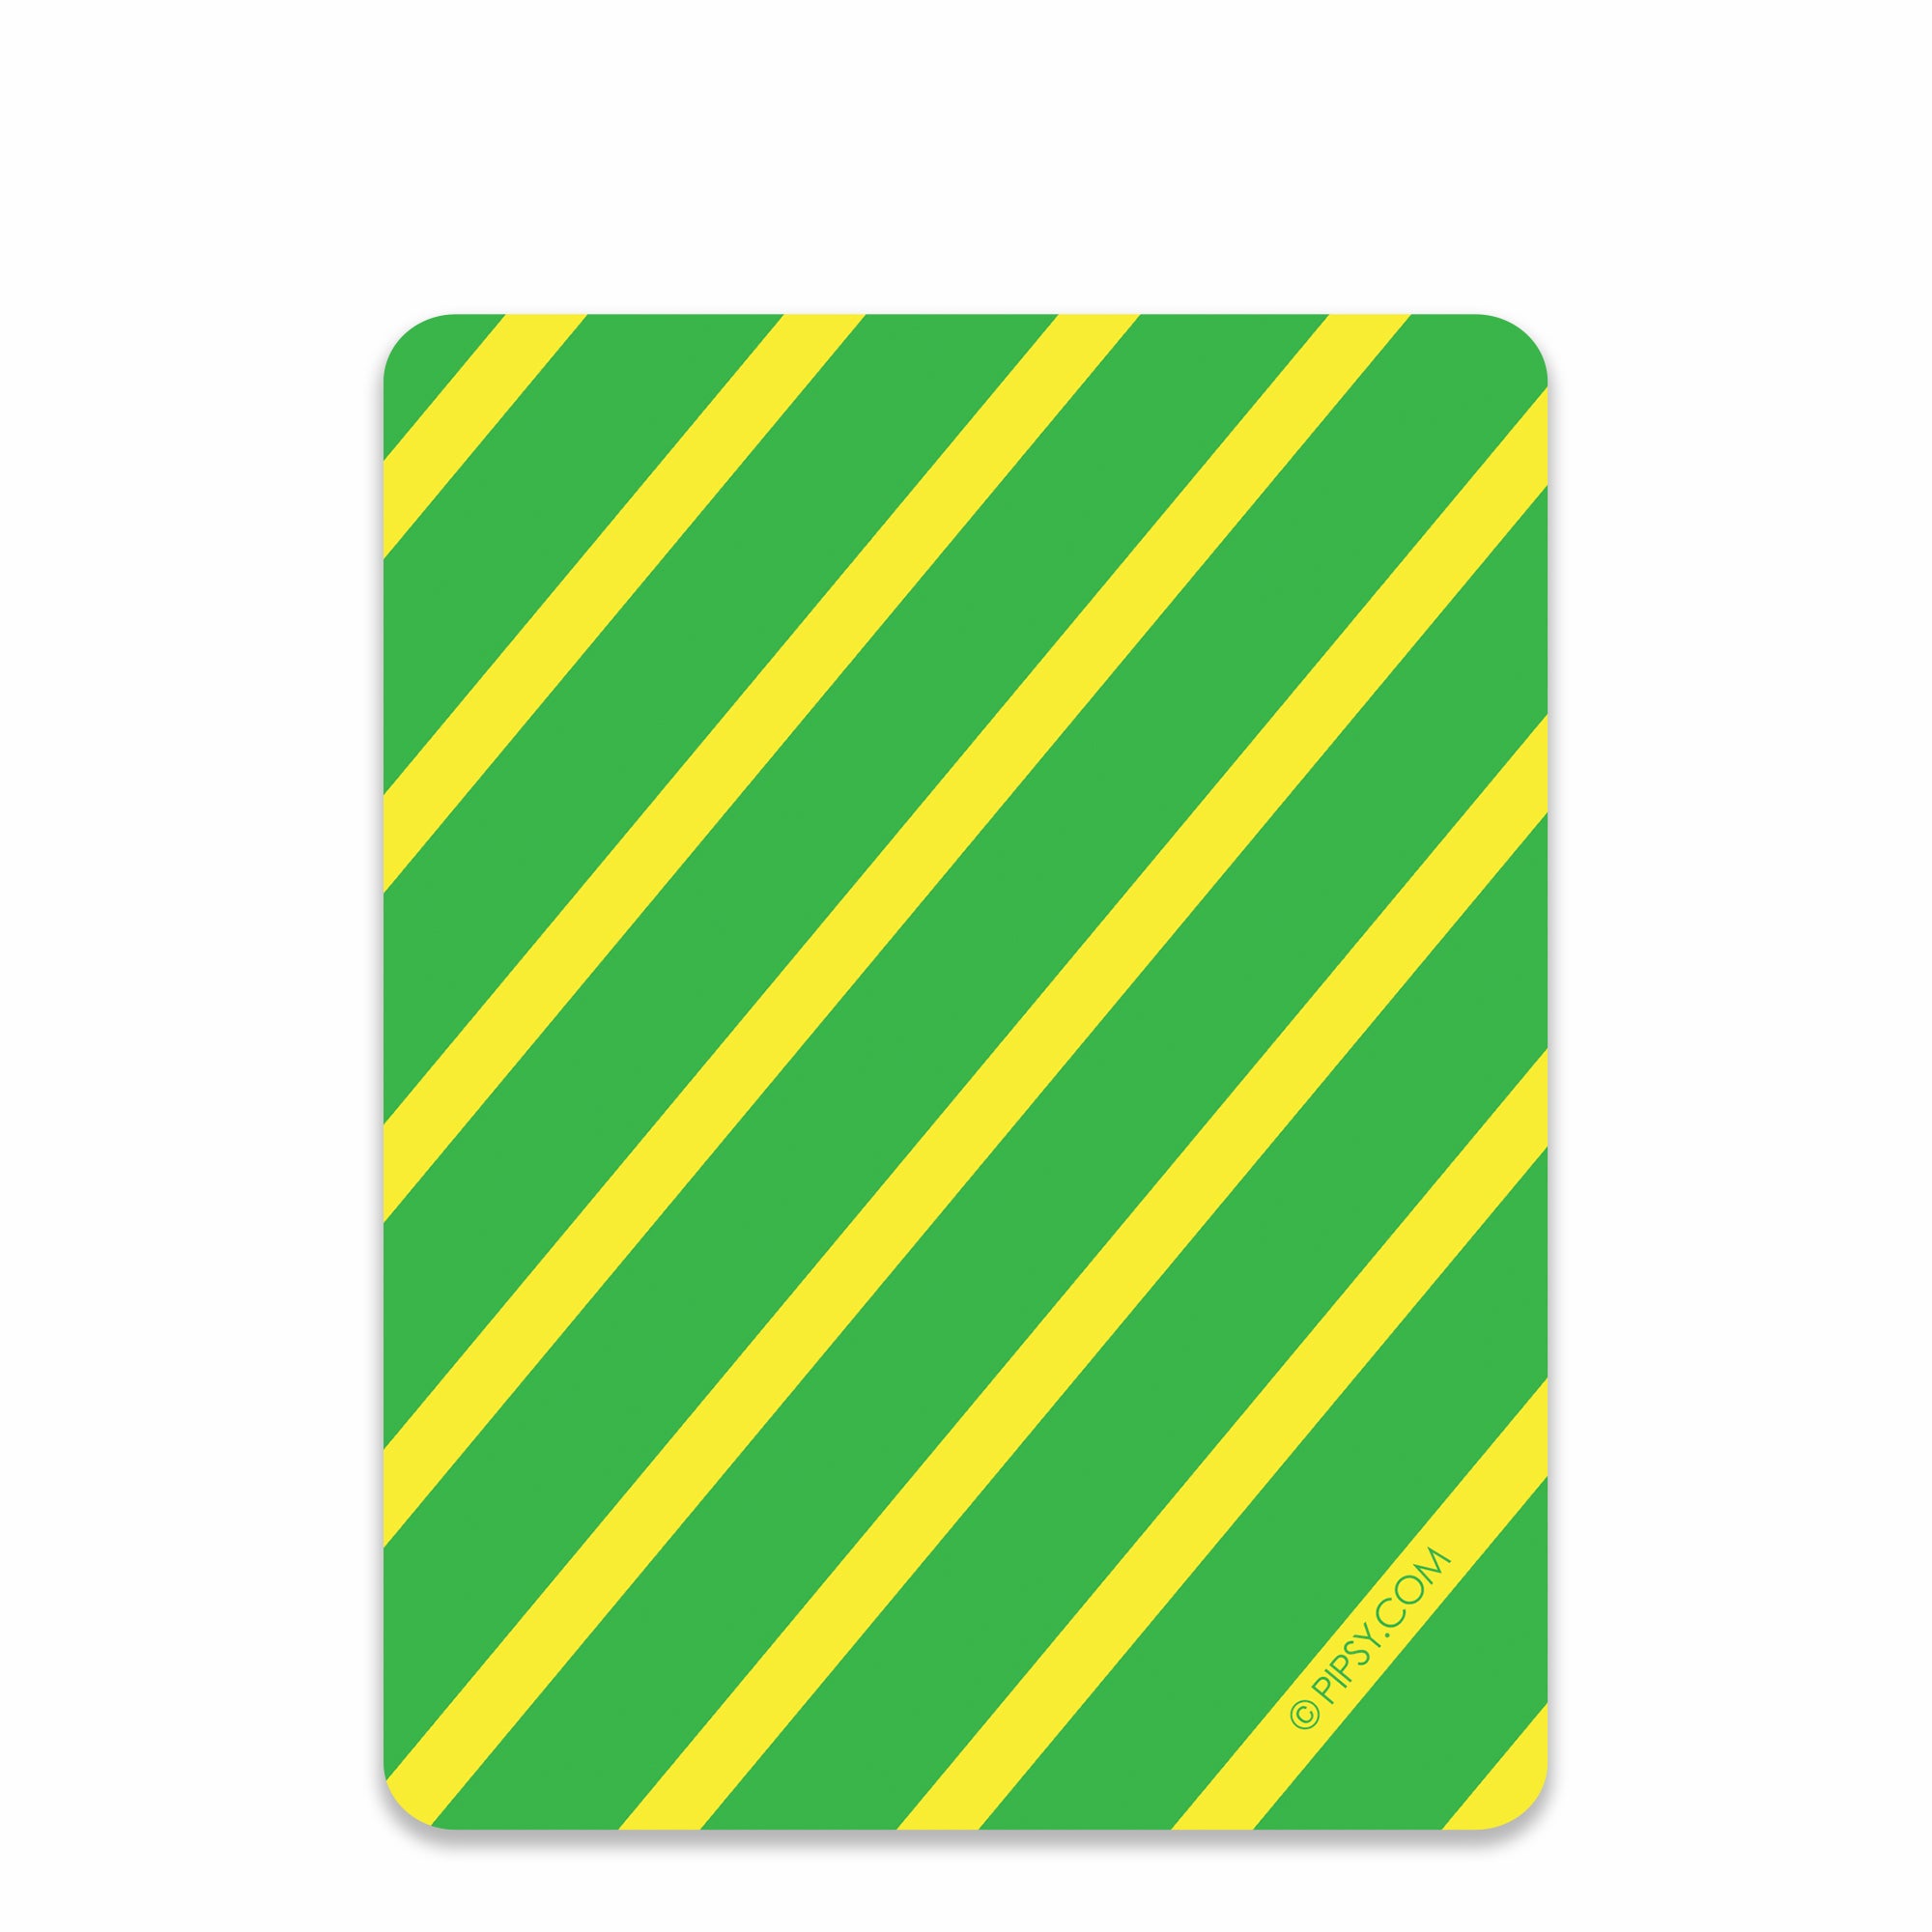 Tractor flat notecards stationery thank you cards, green tractor and yellow stripes, back view